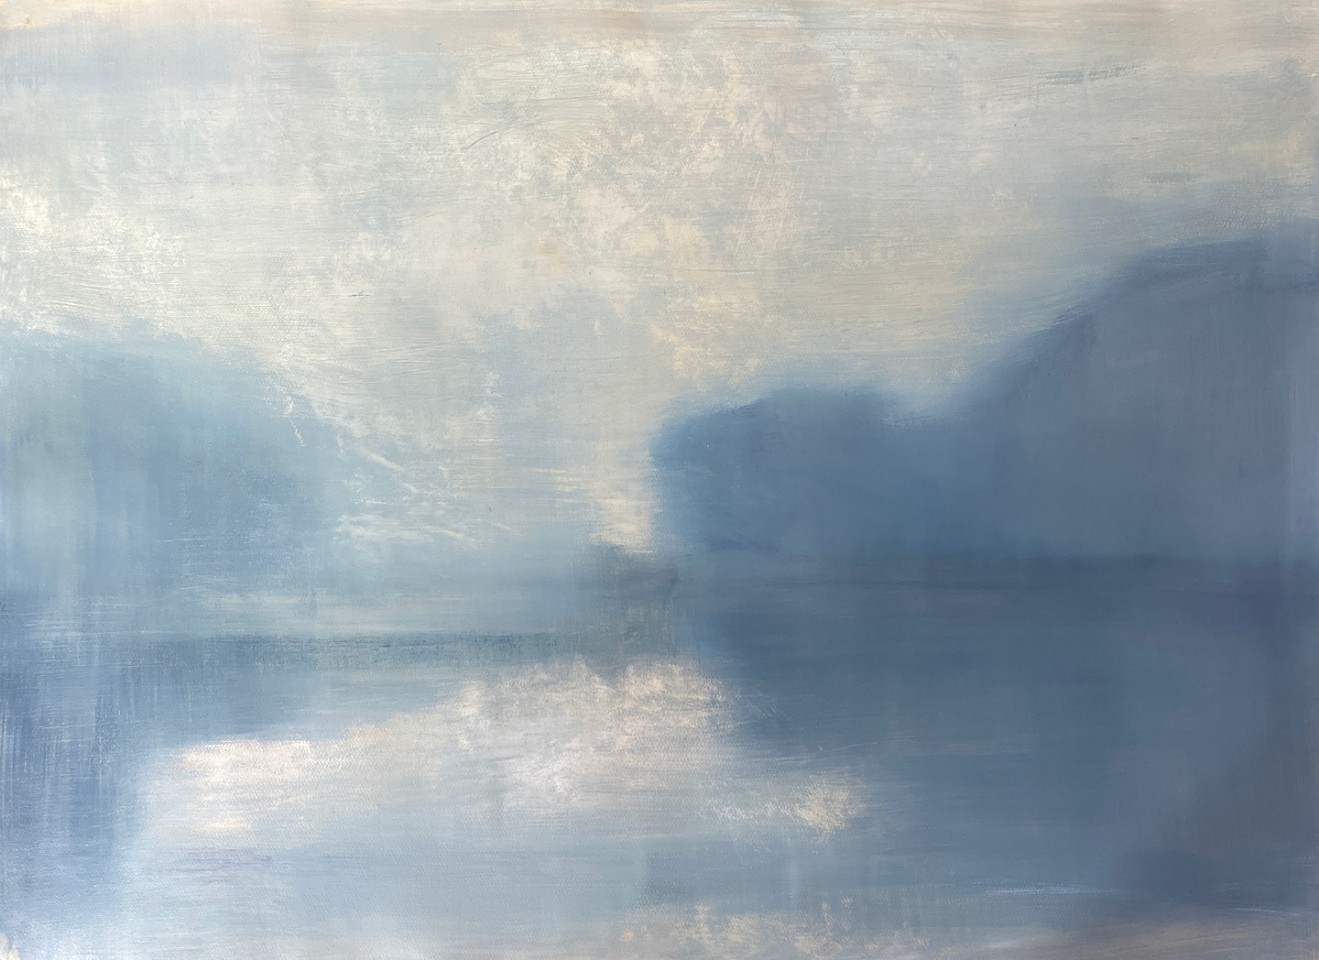 Poogy Bjerklie
Blue Morning, 2022
BJE186
oil on paper, 30 1/2 x 42 inches